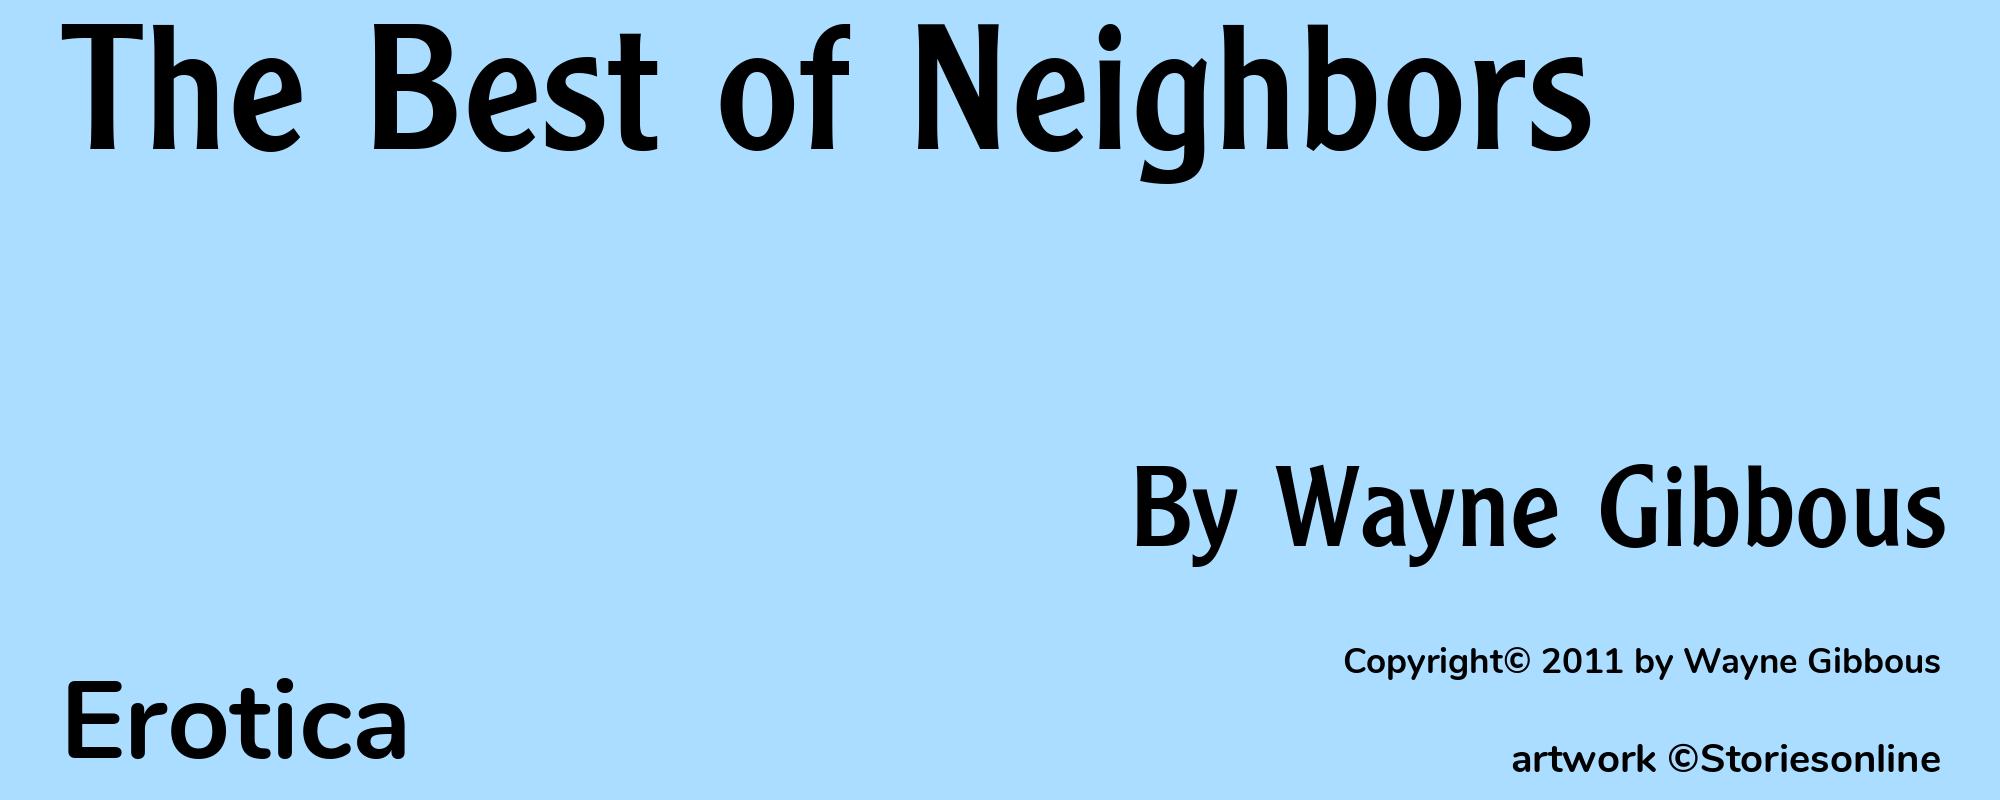 The Best of Neighbors - Cover